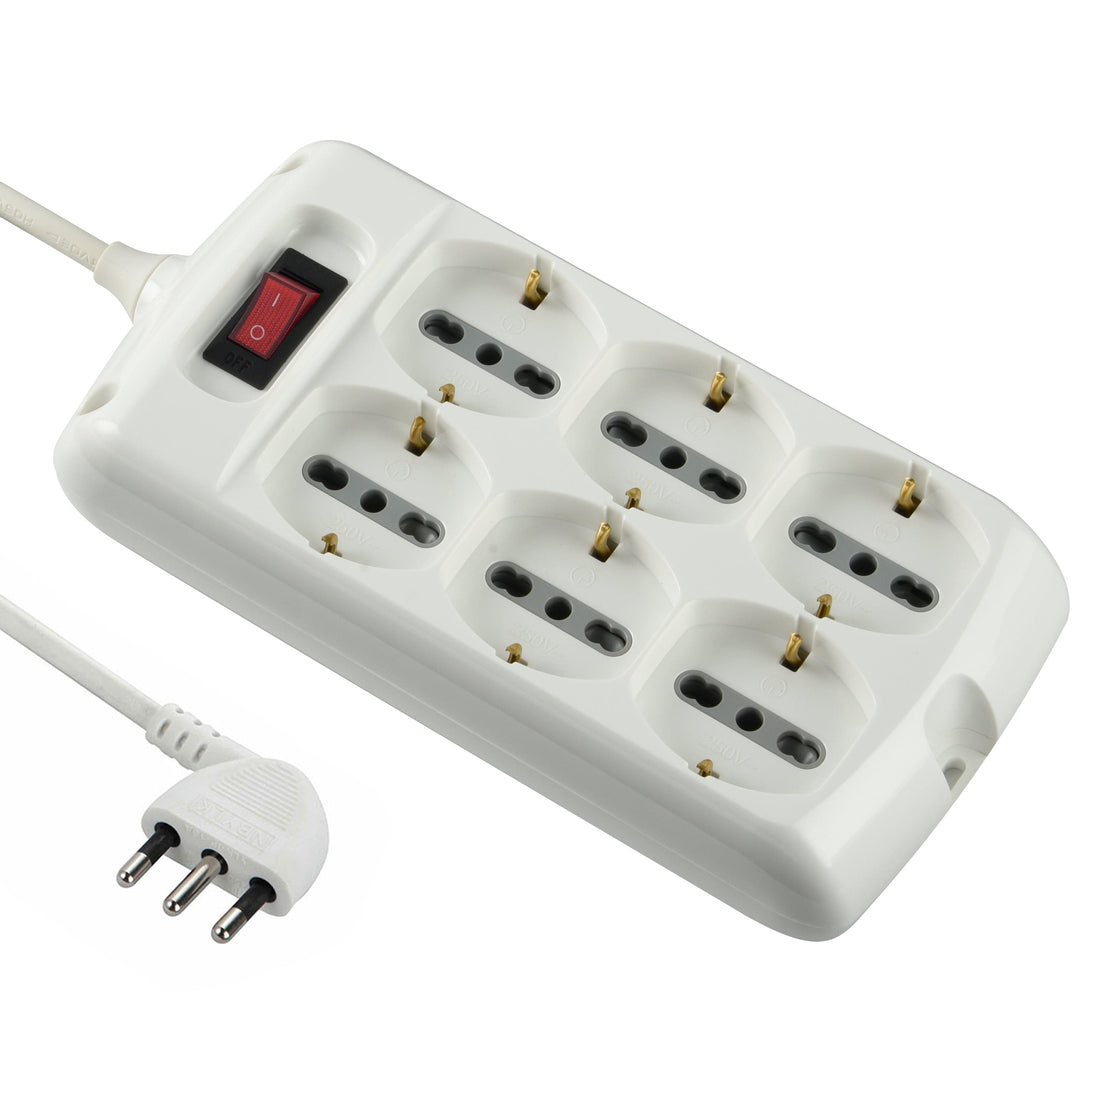 MULTISOCKET 16A PLUG 6-PIN UNIVERSAL CABLE 1,5MT WITH SWITCH WHITE - best price from Maltashopper.com BR420003048